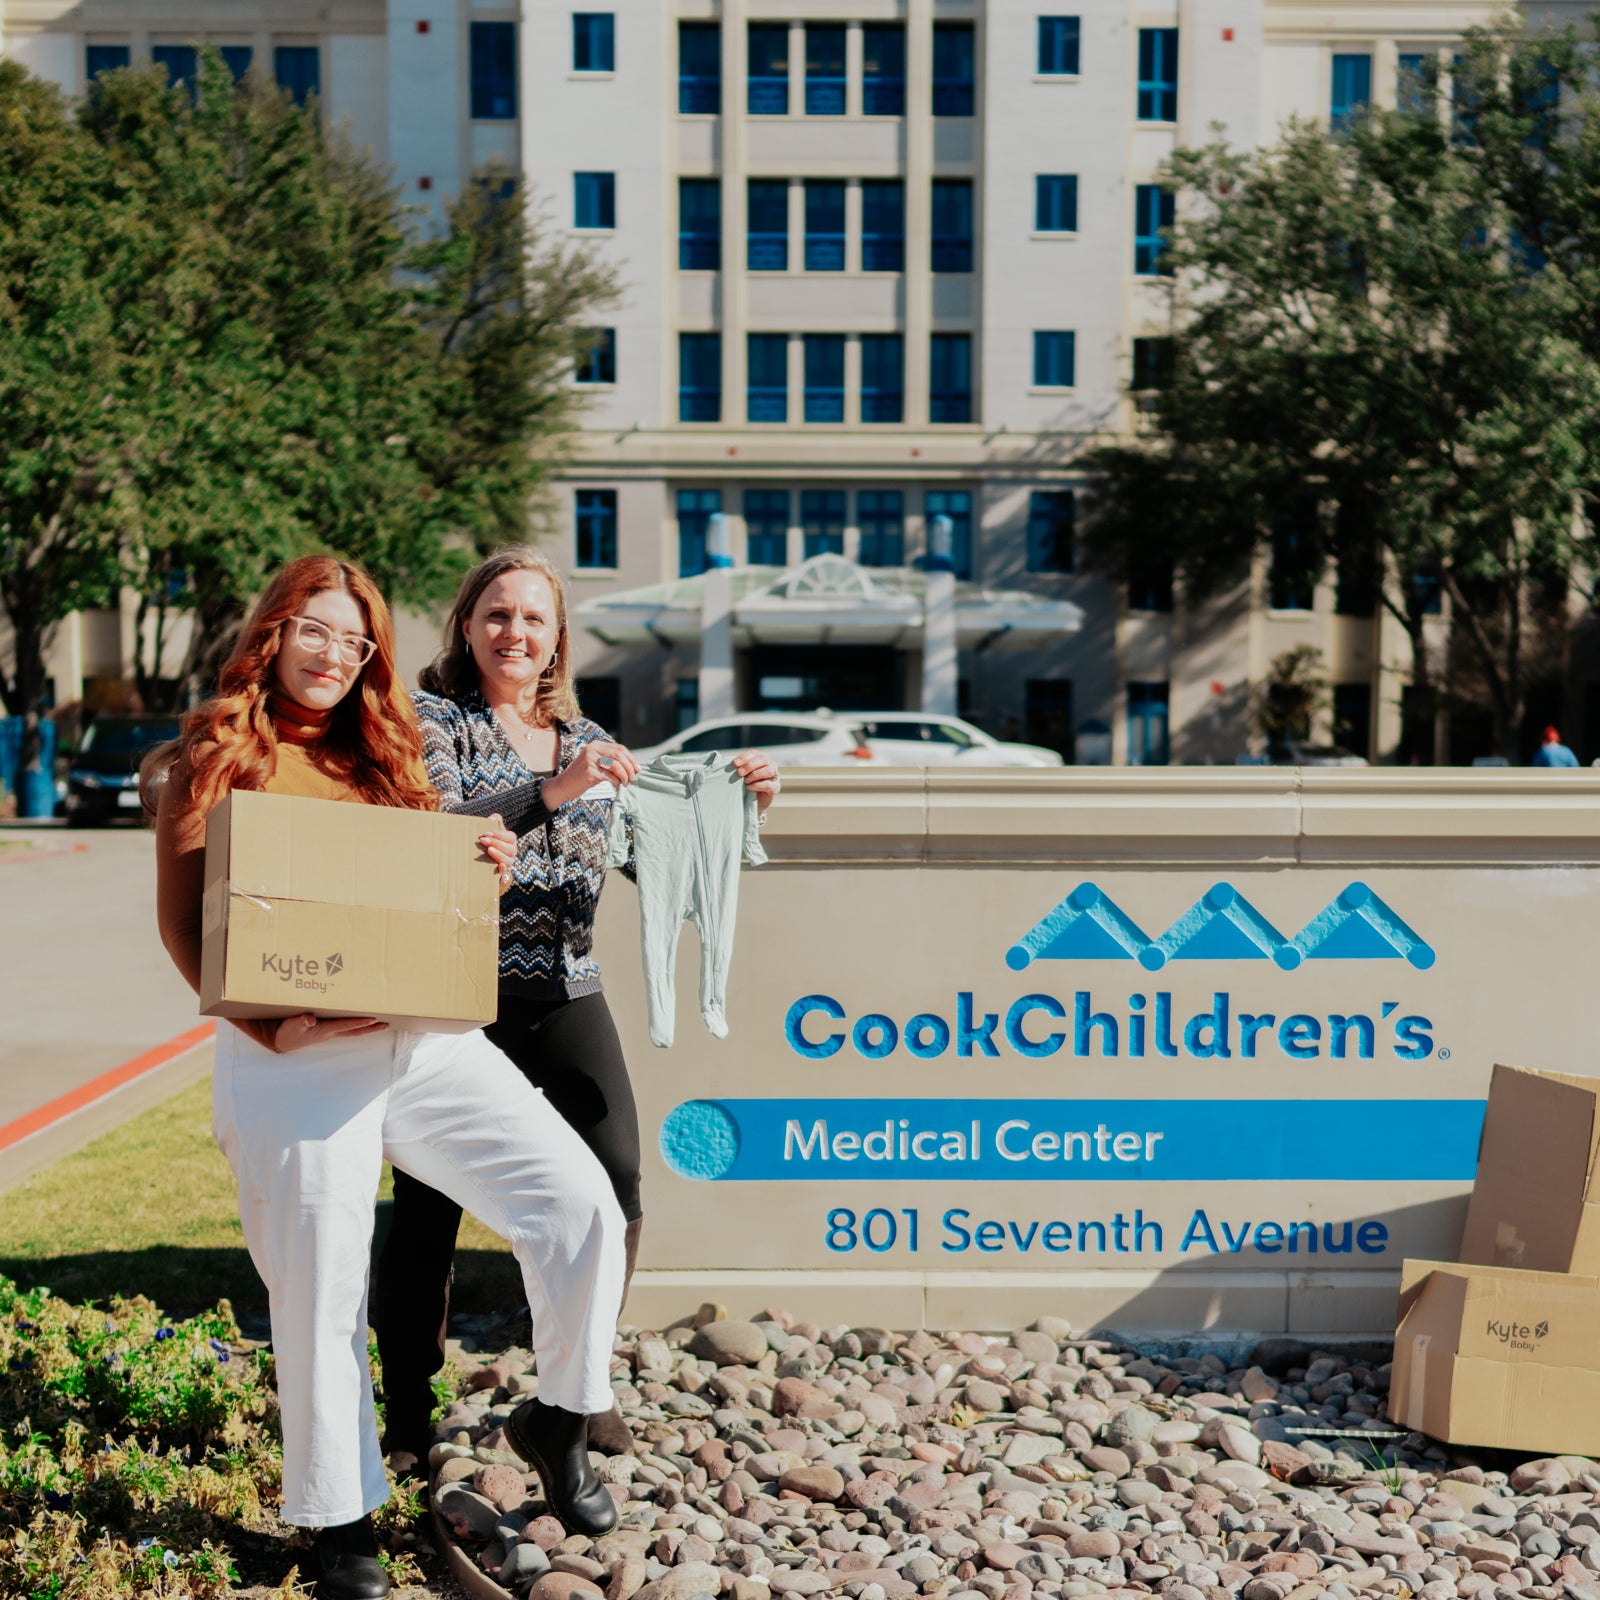 willow, kyte baby's marketing manager, standing in front of cook children's medical center with a box of clothing donations